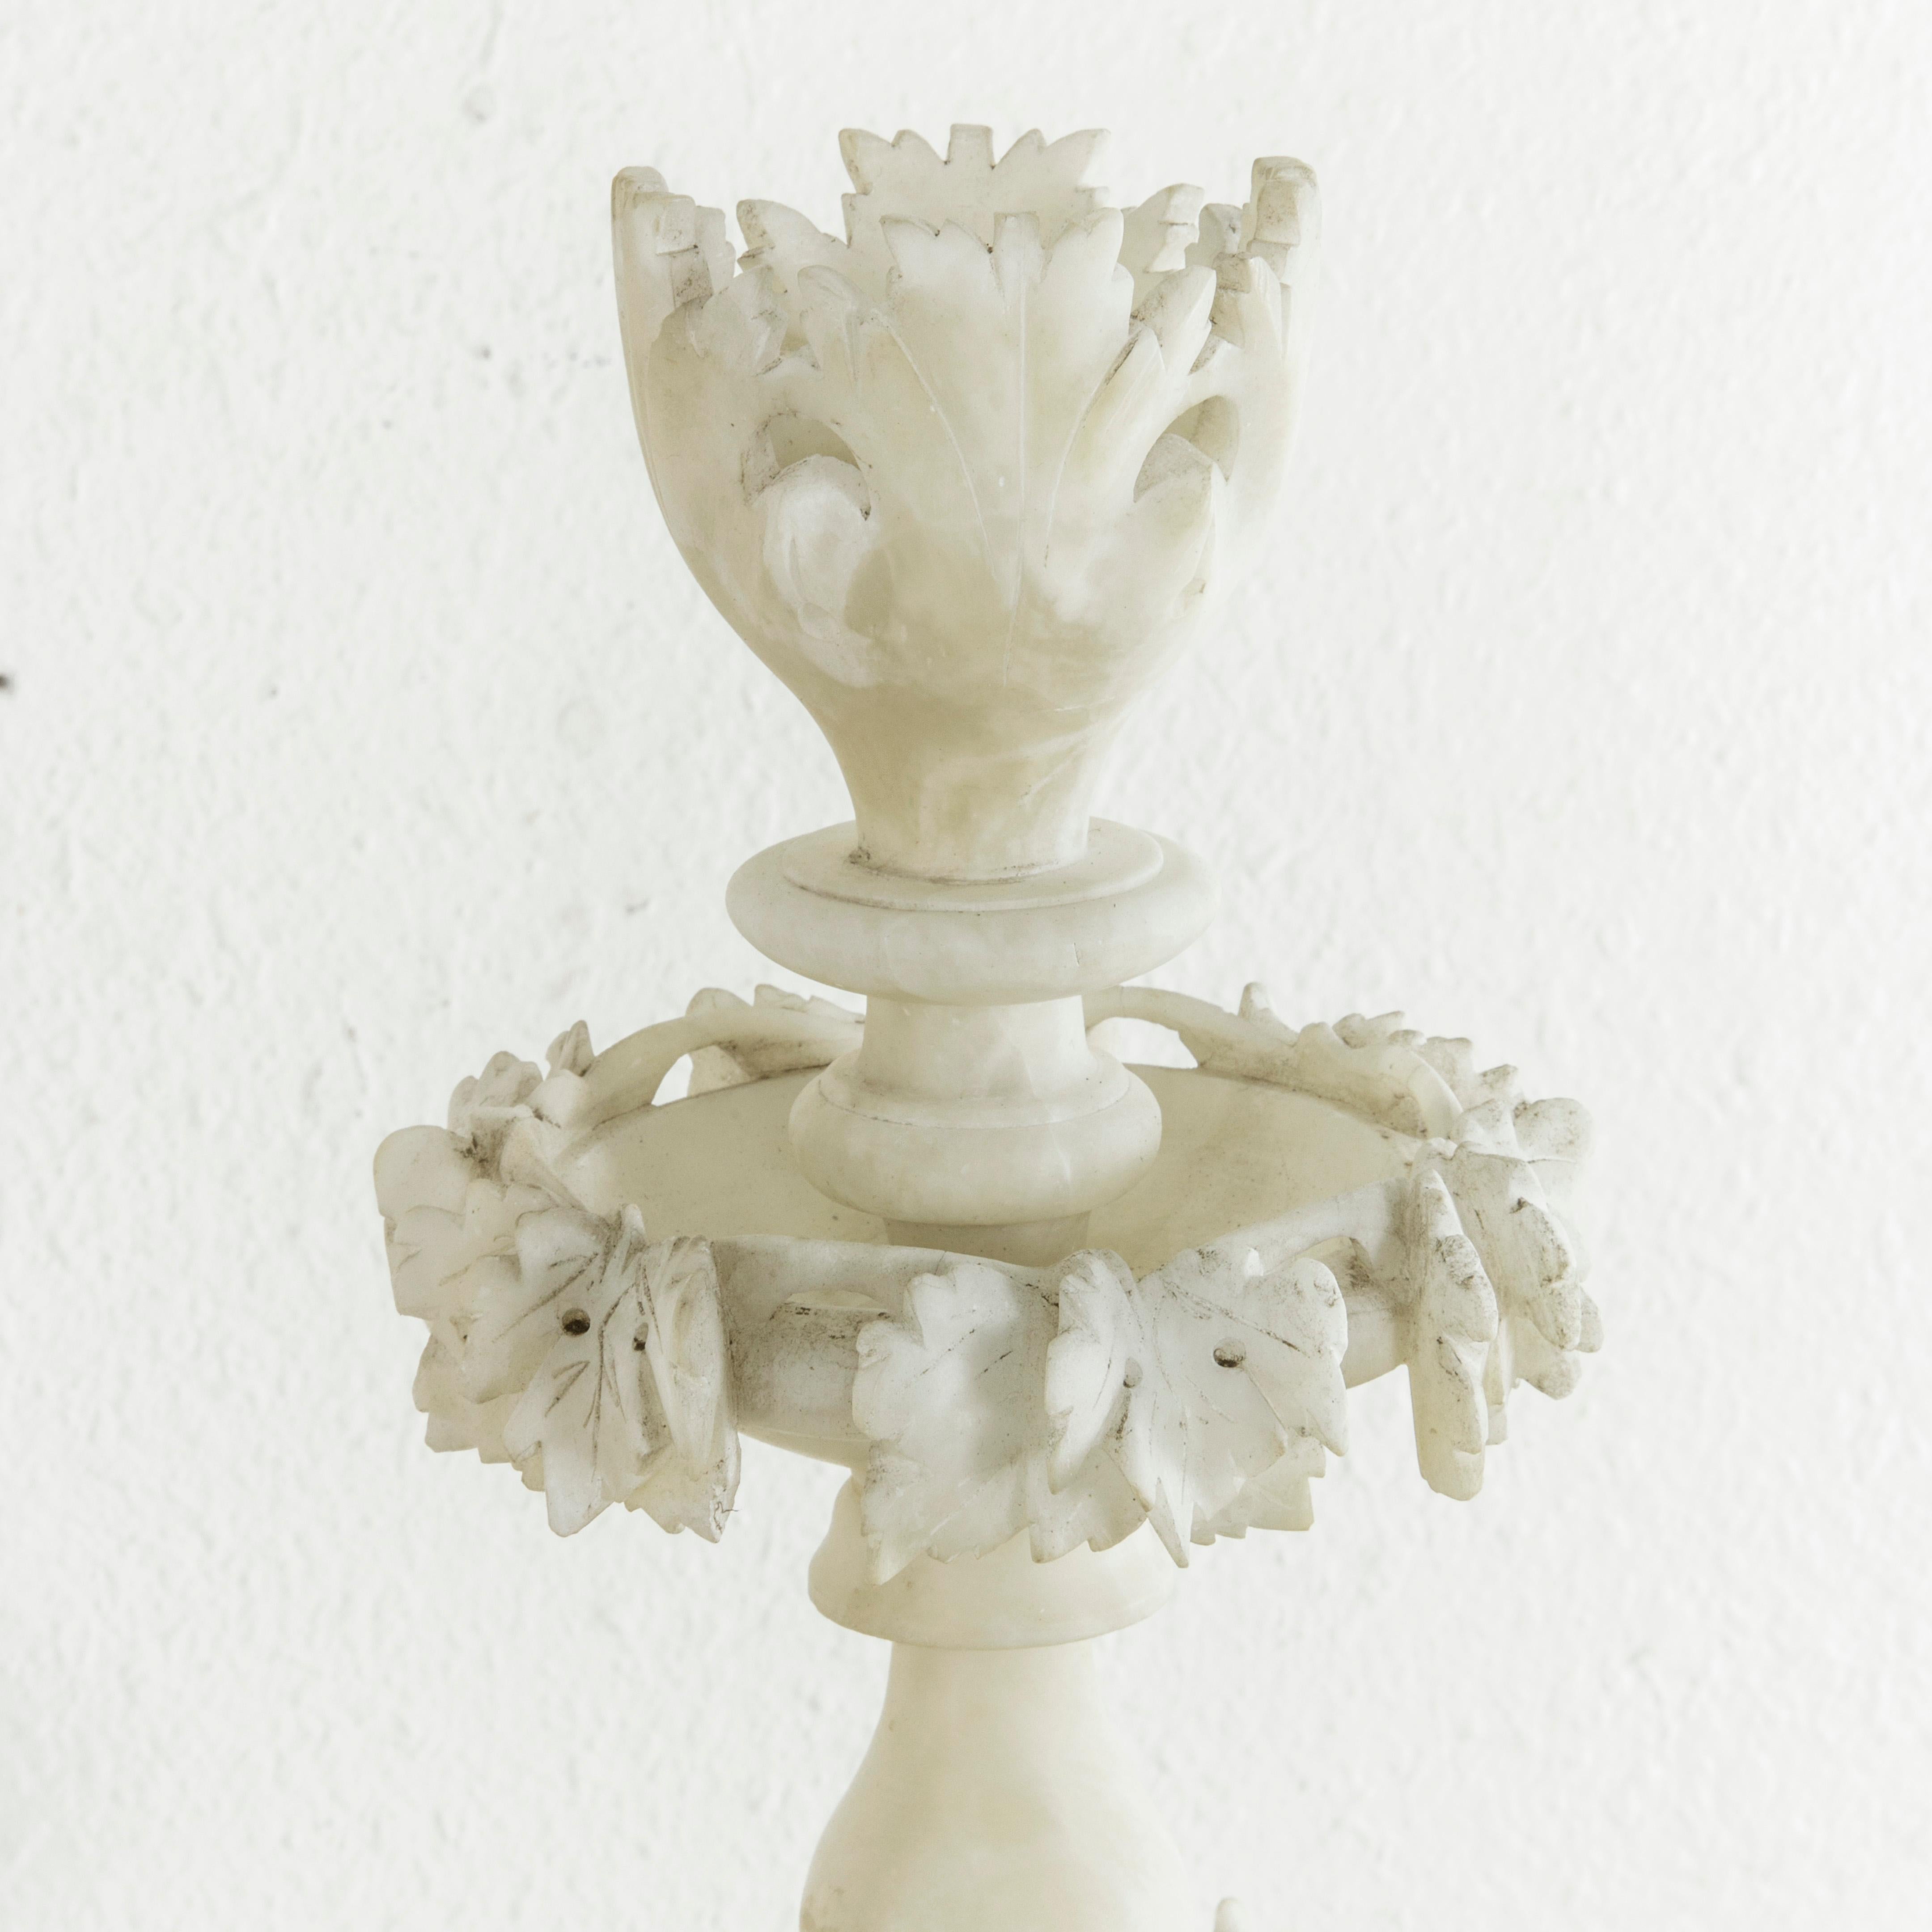 Originally used to serve candies, fruits, or nuts, this large-scale French alabaster presentation piece features three tiers, each with deep relief hand-carved detailing of grape vines and leaves around the rim. A stylized bouquet of leaves crowns